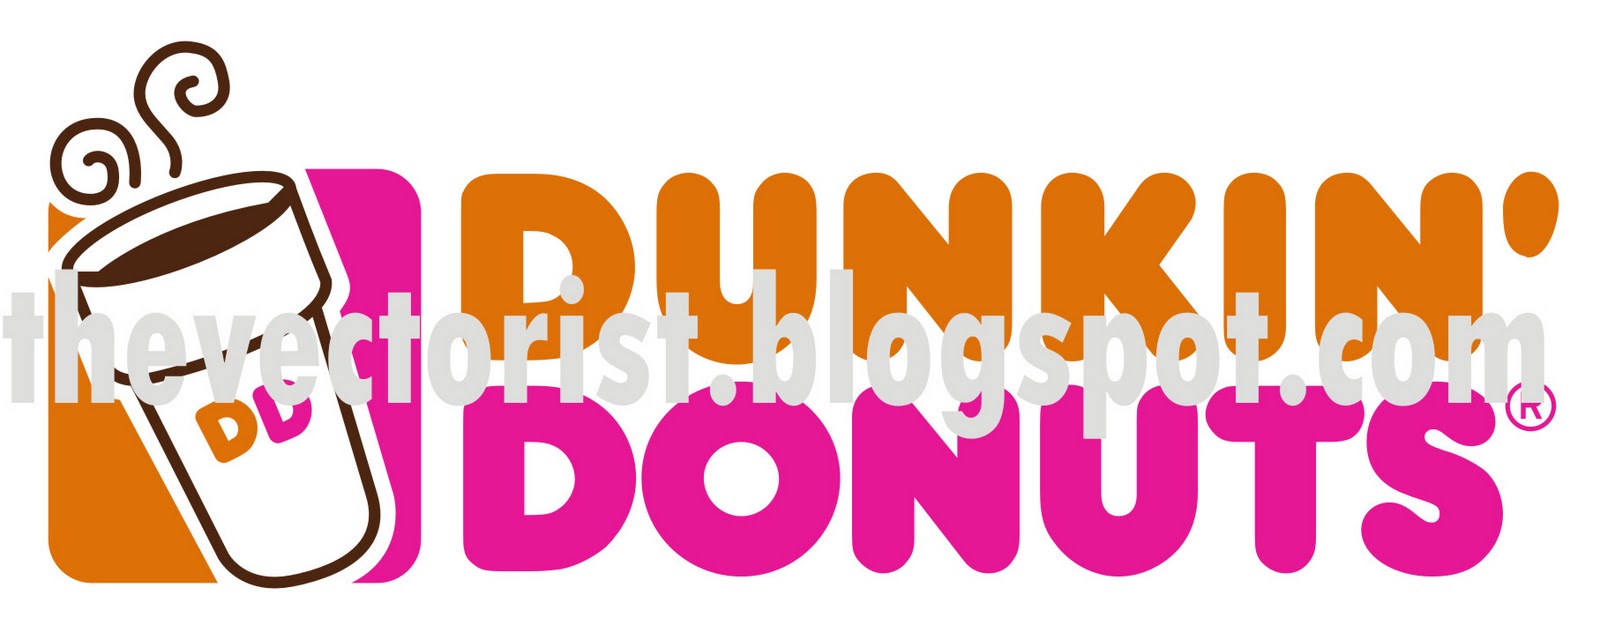 Dunkin' Donuts vector logo | Free Vector and image Design